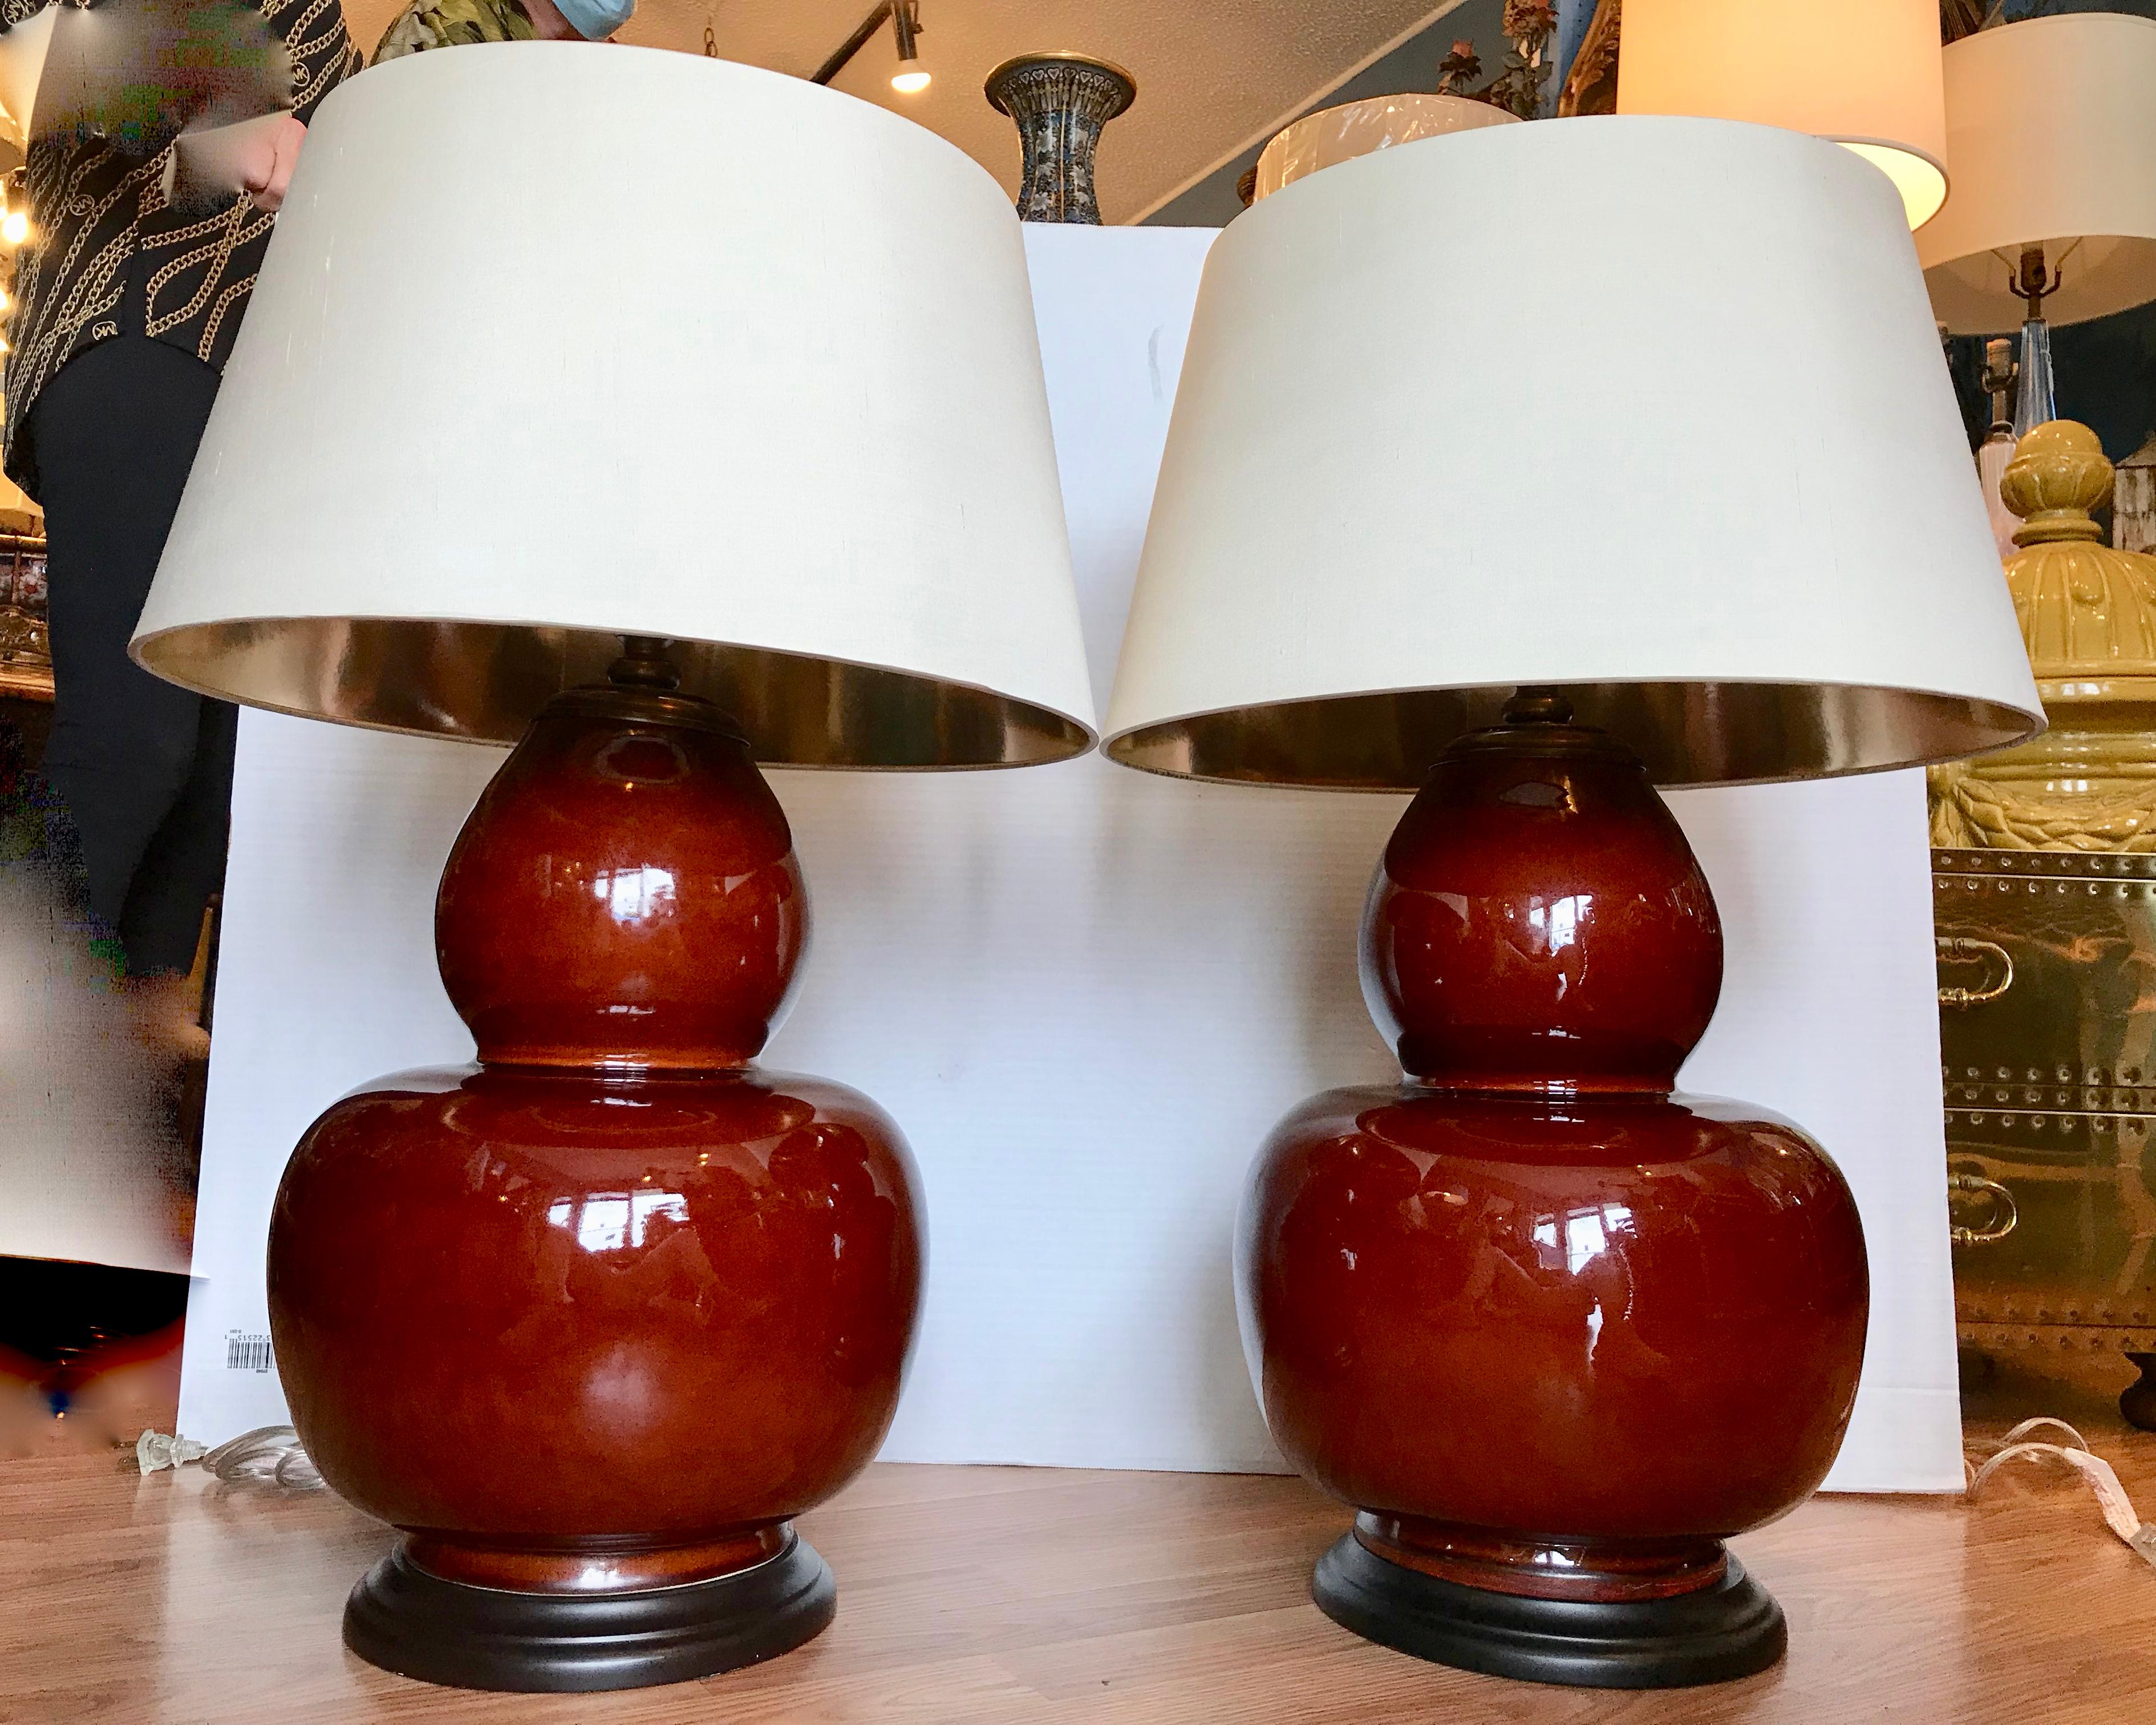 Unusual gourd form.
The lamps are generously scaled and fitted with quality shades.
Dramatic scale and proportions. (measurements include shades).